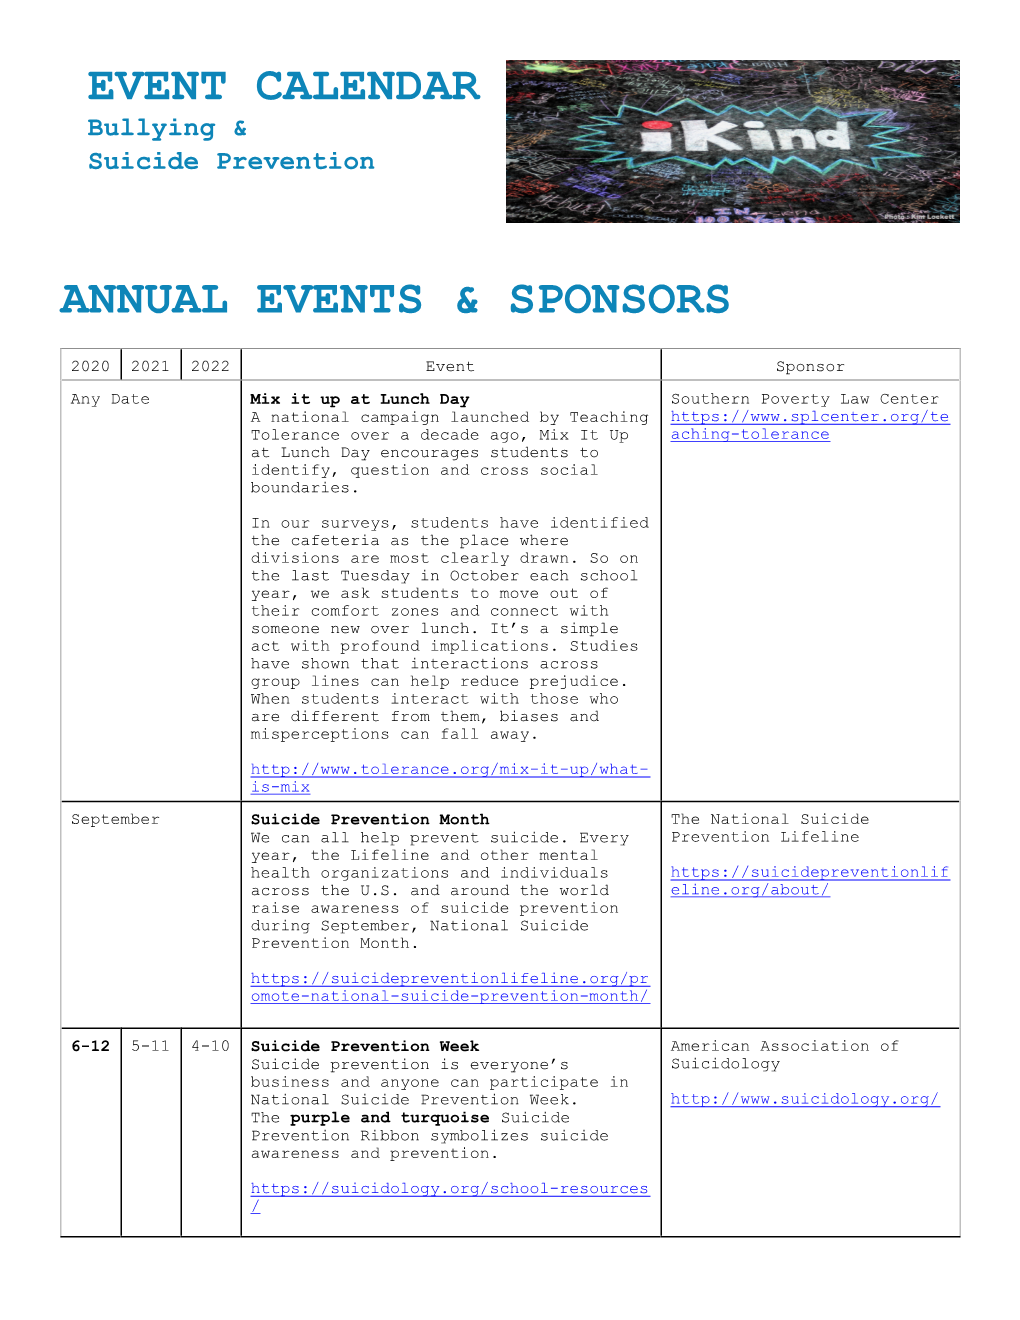 Event Calendar of Anti-Bullying & Suicide Prevention Days